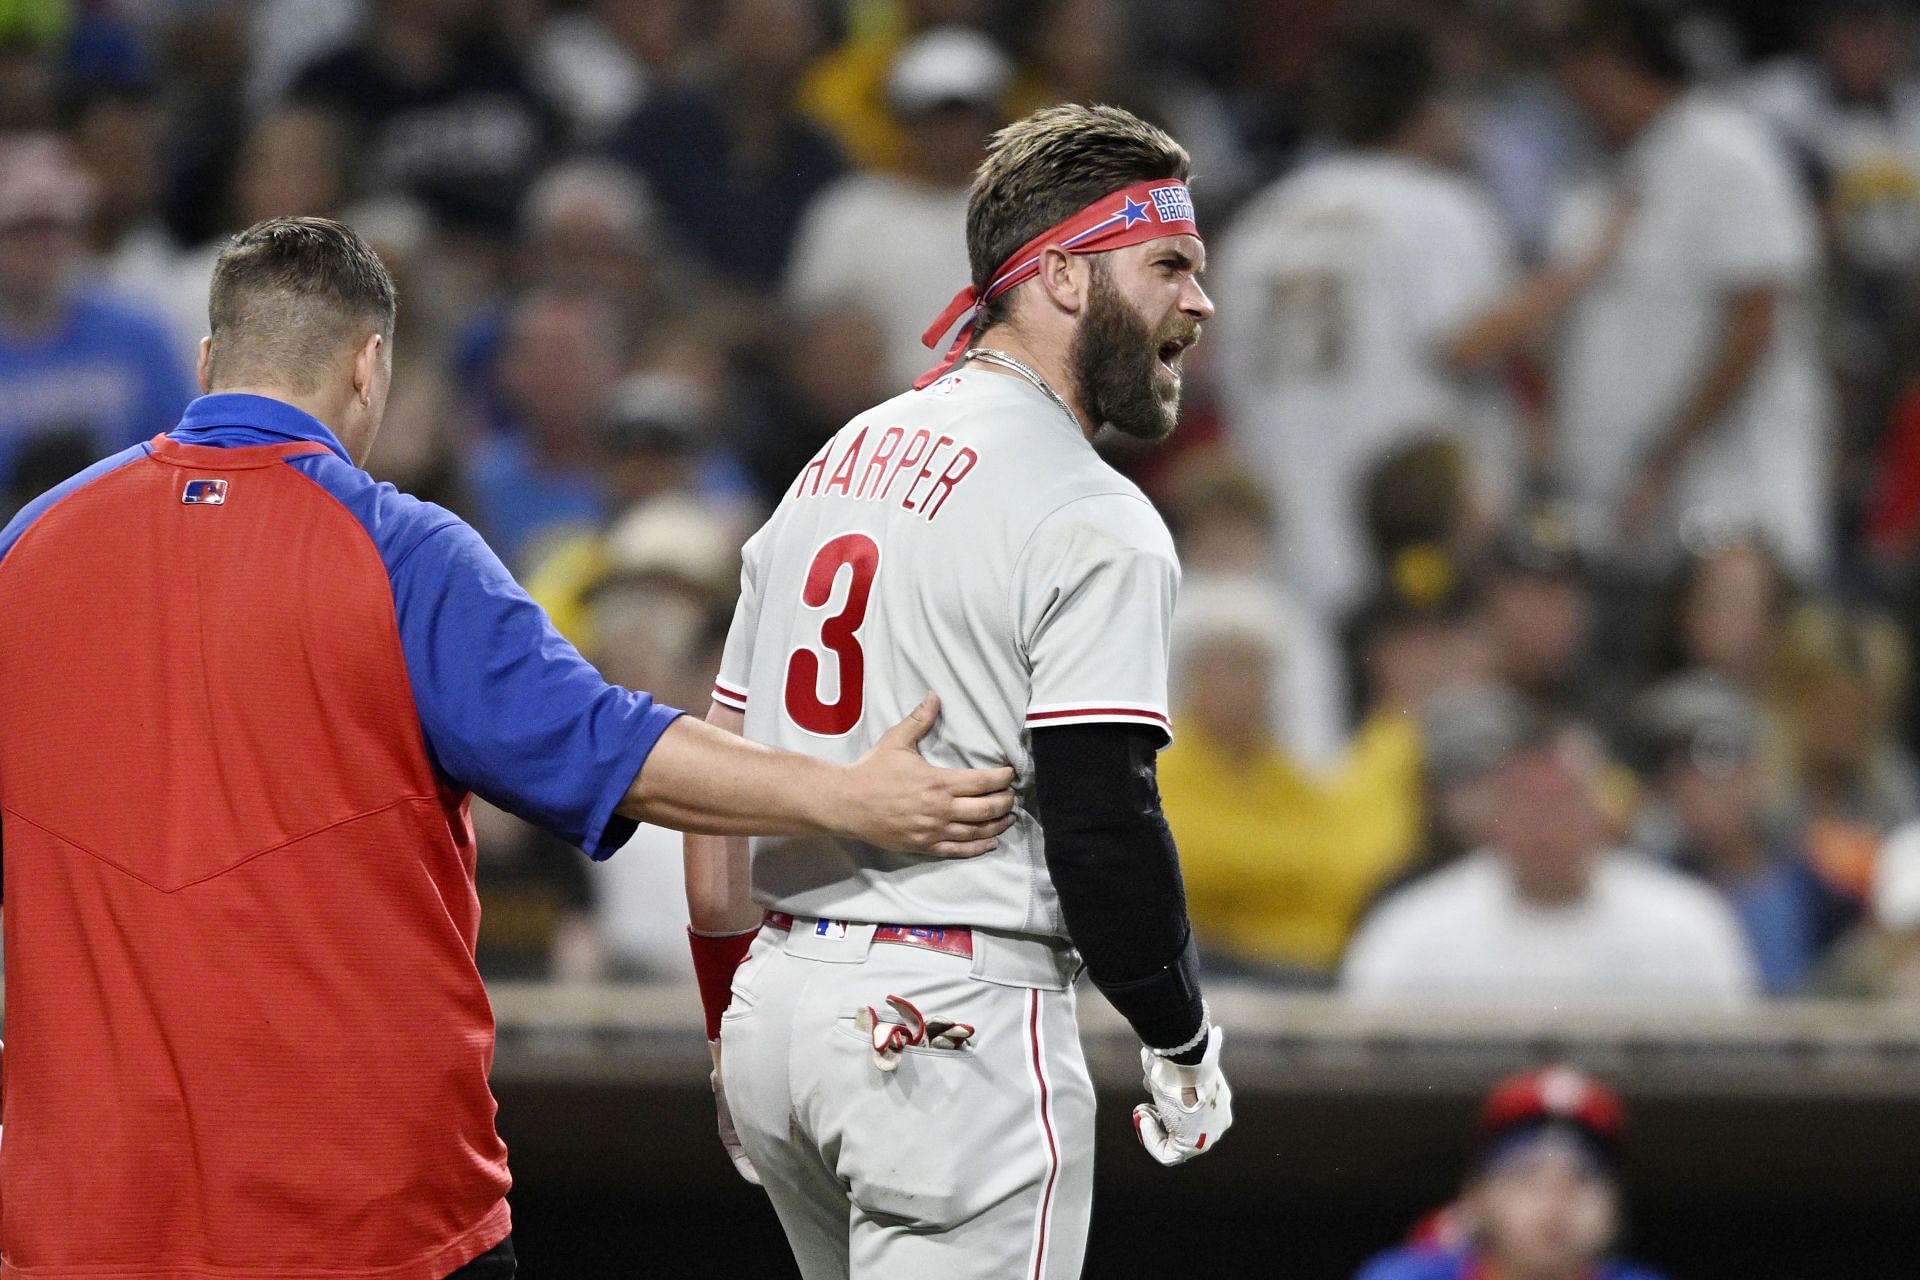 Bryce Harper of the Philadelphia Phillies yells at Blake Snell of the San Diego Padres after being hit with a pitch